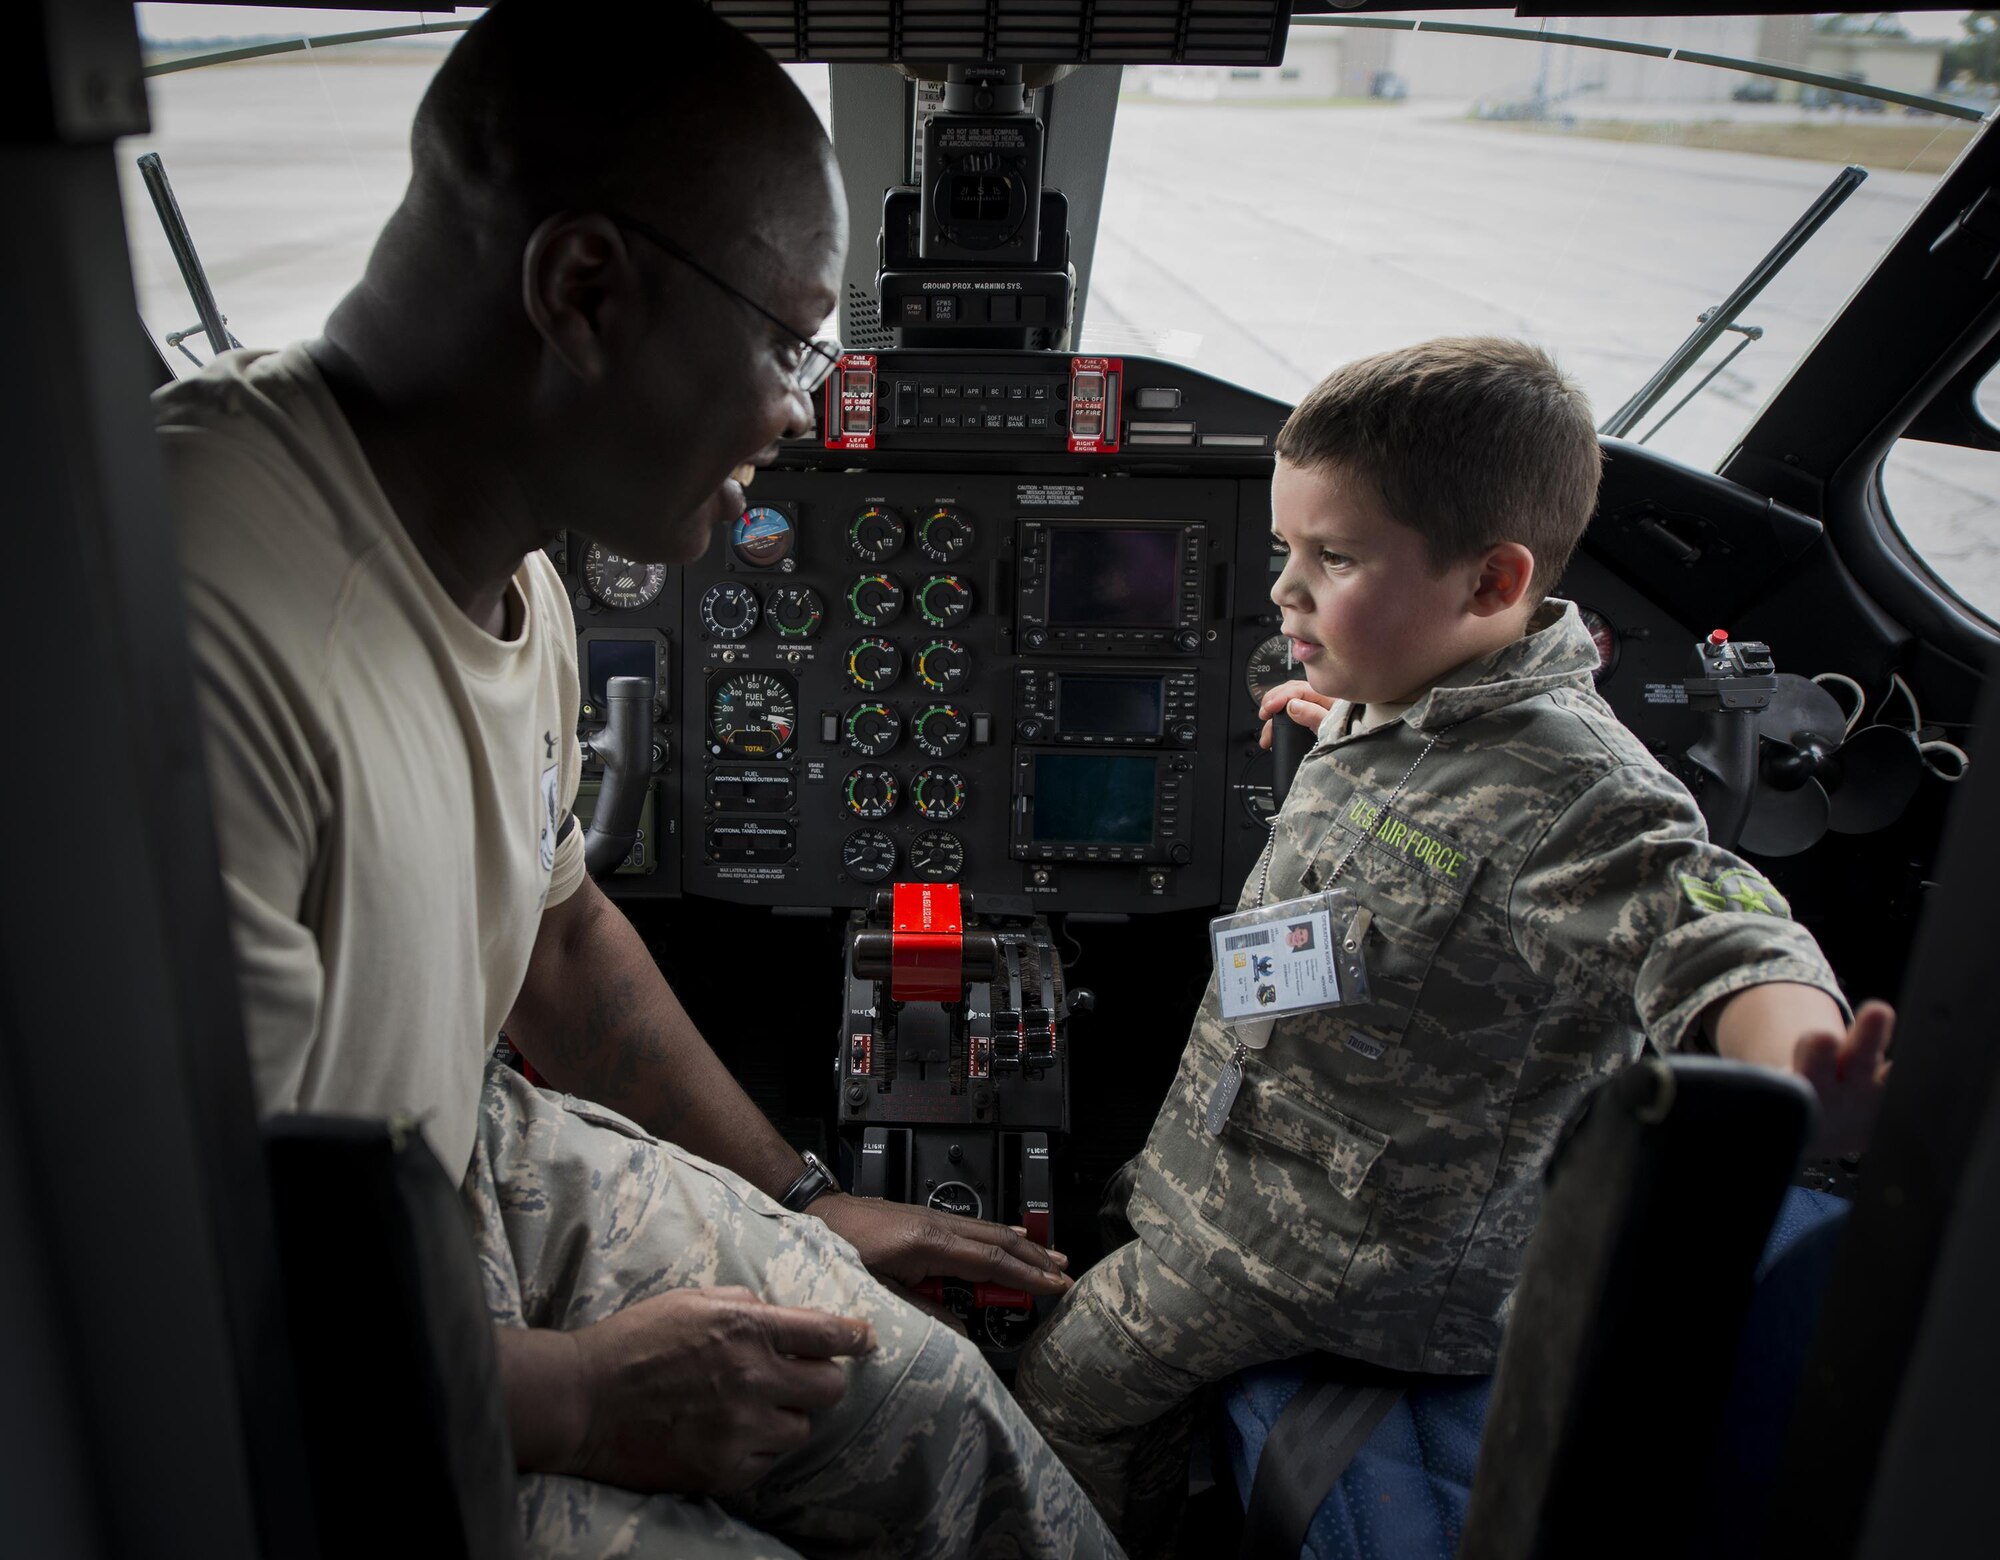 Tech. Sgt. Sedrick Dottin, 919th Special Operations Aircraft Maintenance Squadron, and Kekoa Lee tours a C-145 during the Duke Field Operation Hero event Nov. 7. The event was a mock deployment exercise for 919th Special Operations Wing children. The exercise started with the kids receiving orders before deploying to the 919th Special Operations Logistics Readiness Squadron building. The “little deployers” were issued fake military ID cards, dog tags, and immunizations. (U.S. Air Force photo/ Tech. Sgt. Jasmin Taylor)